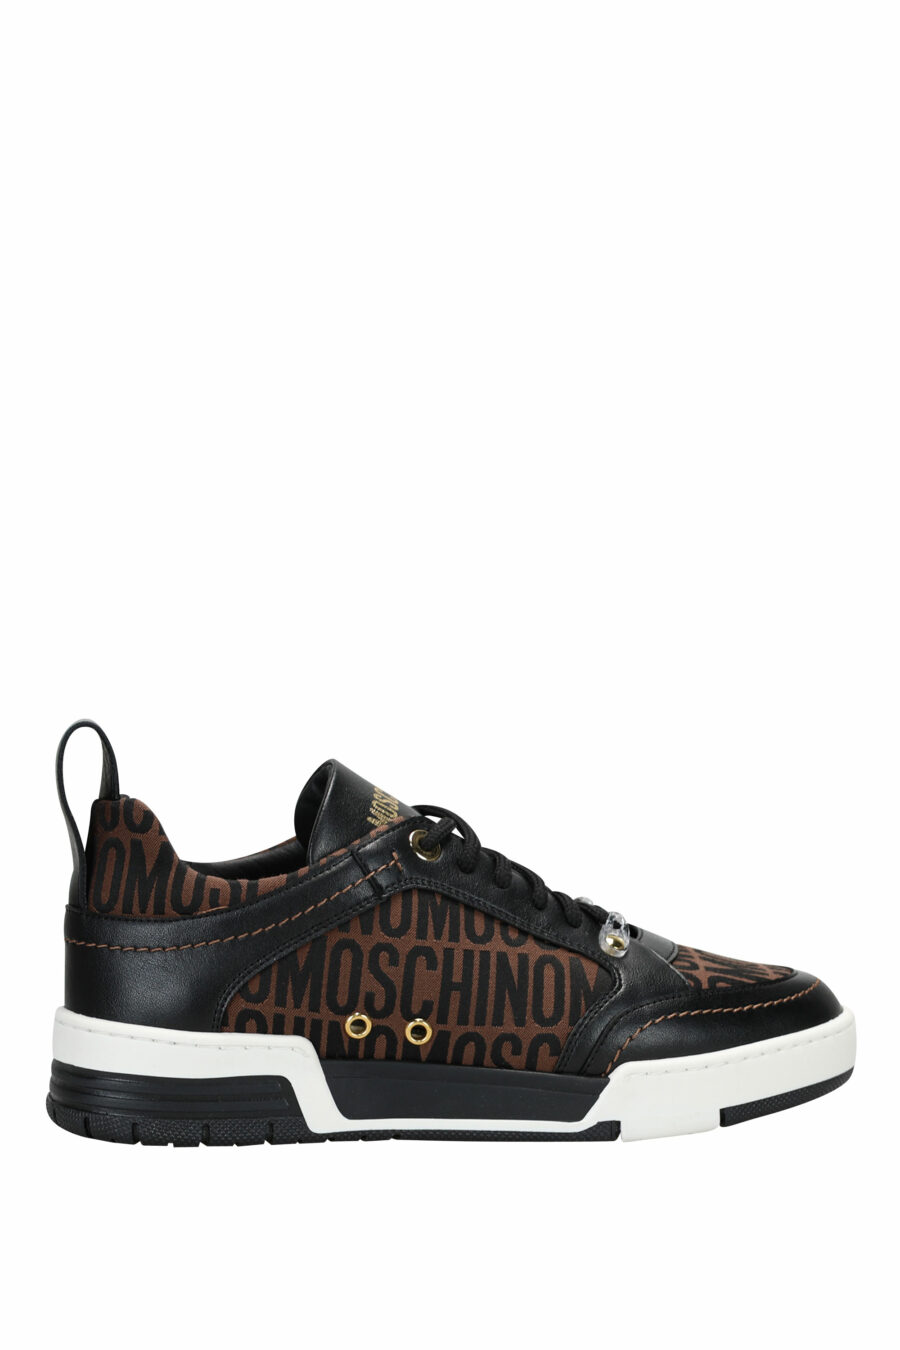 Brown and black leather trainers with "all over logo" and white sole - 8054653838109